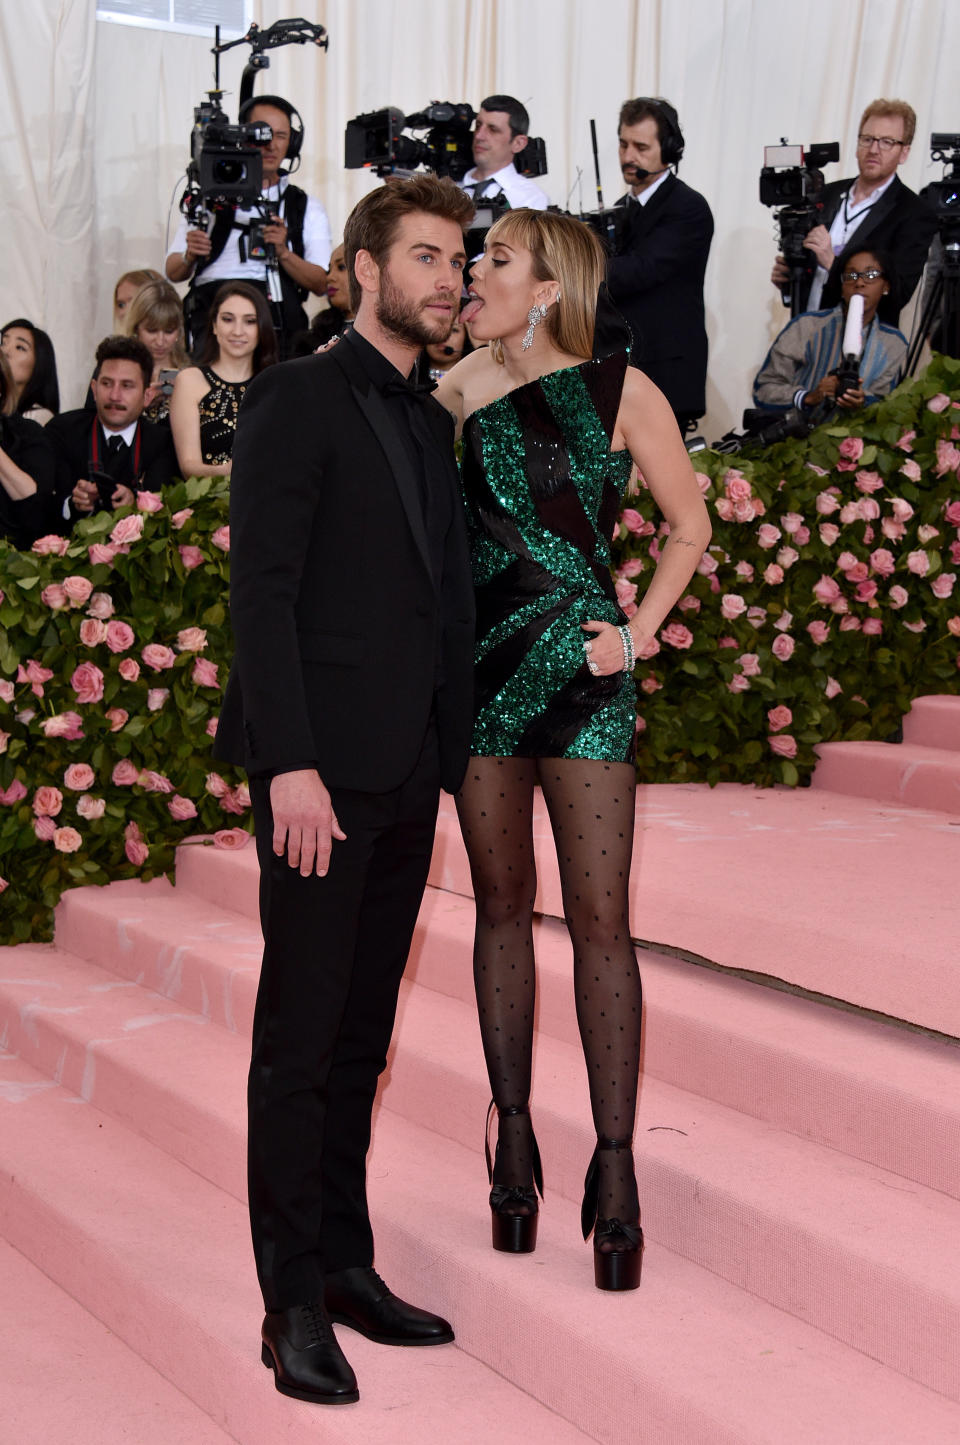 Miley licks Liam on the Met Gala red carpet. Photo: Getty